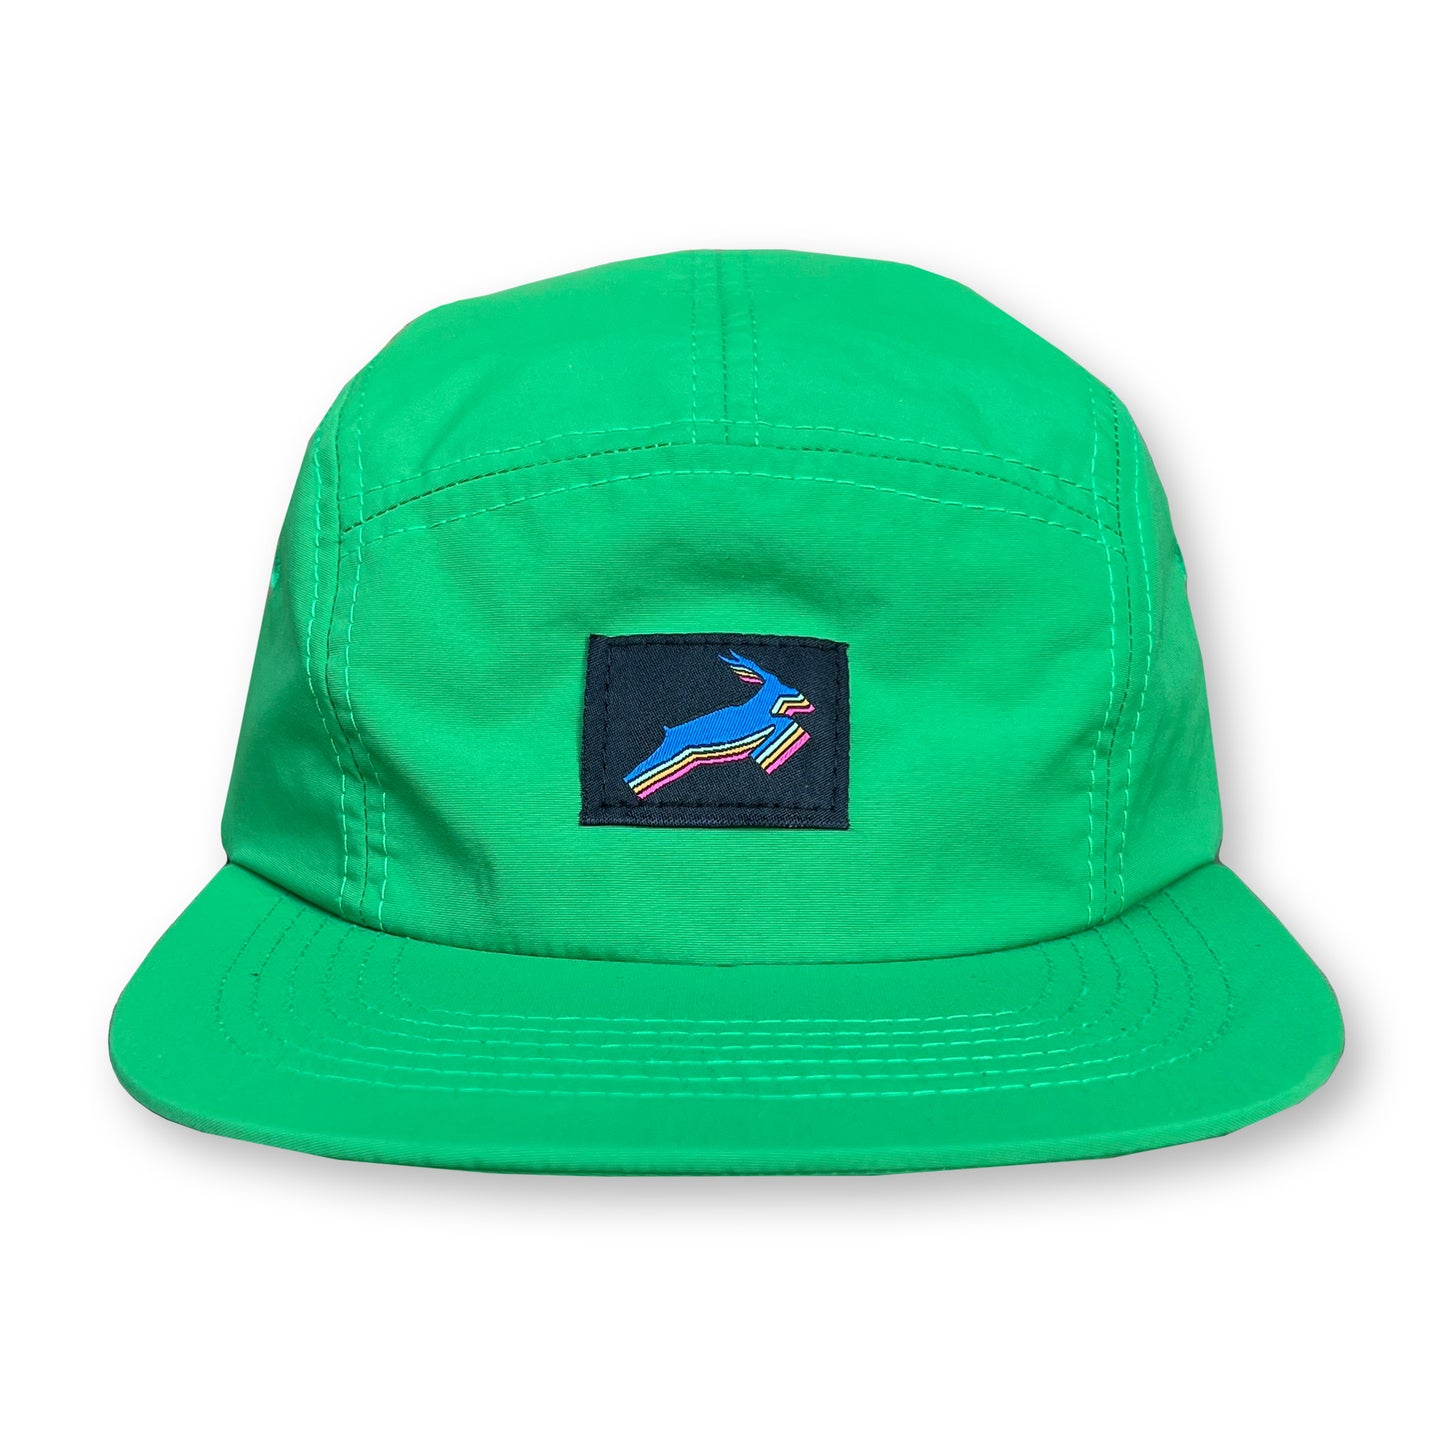 Antelope Five Panel Camp Hat / Sour Apple Nylon with Lite Brite Antelope Patch